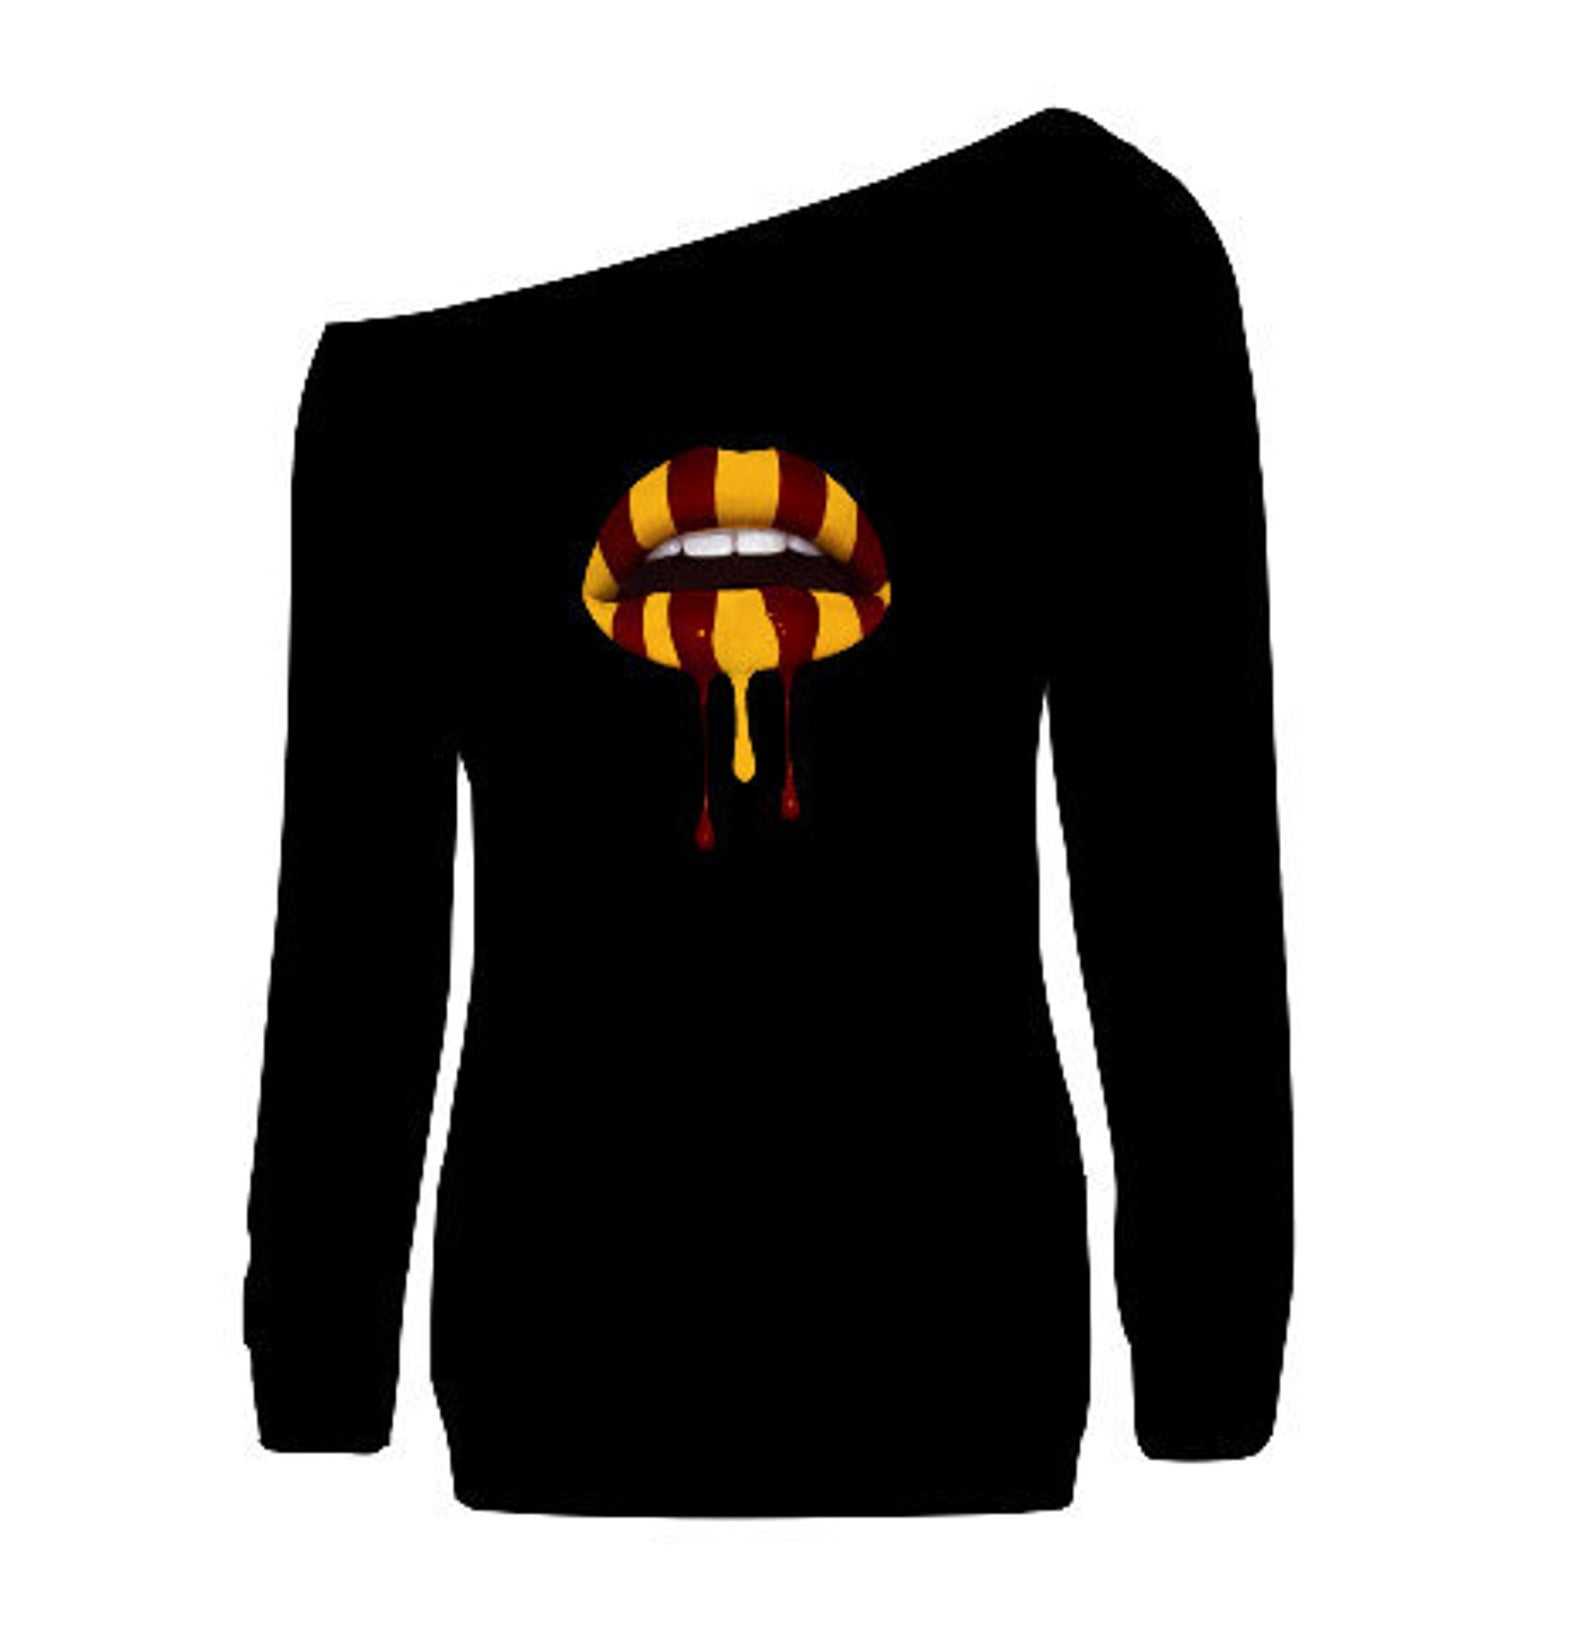 7 Items That Will Help You Show Your Bethune-Cookman University Pride In Time For Homecoming